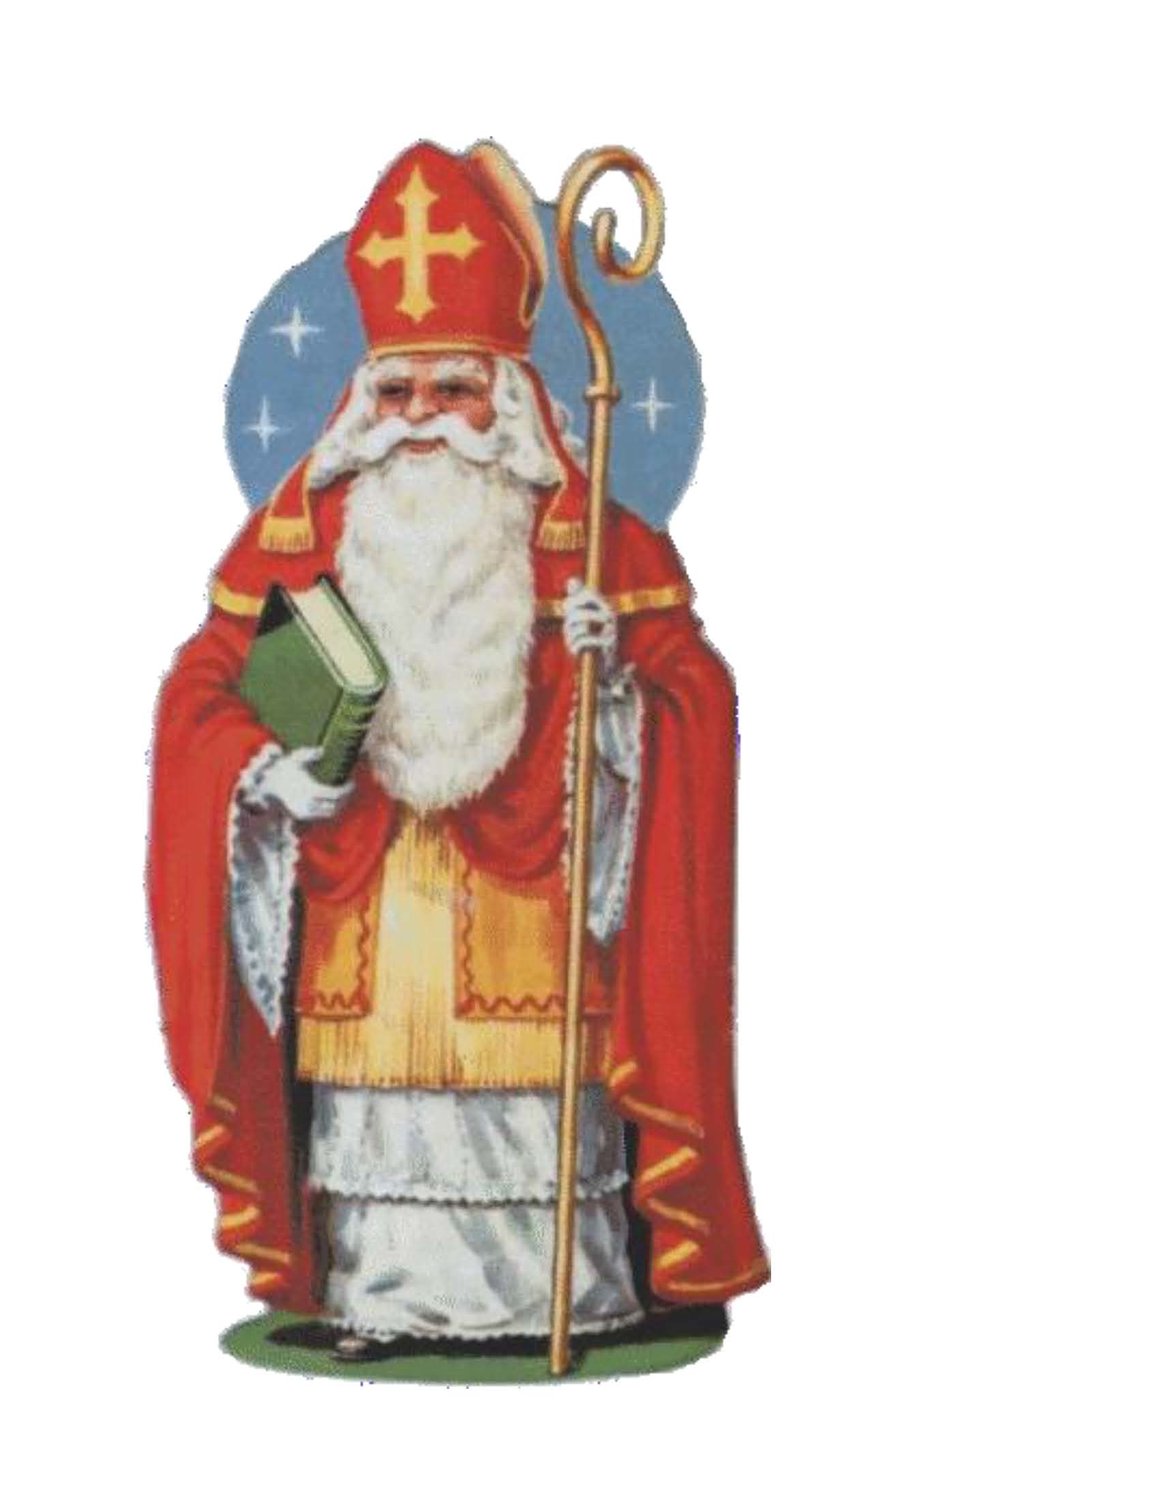 St. Nicholas is usually depicted in his Bishop's robes.